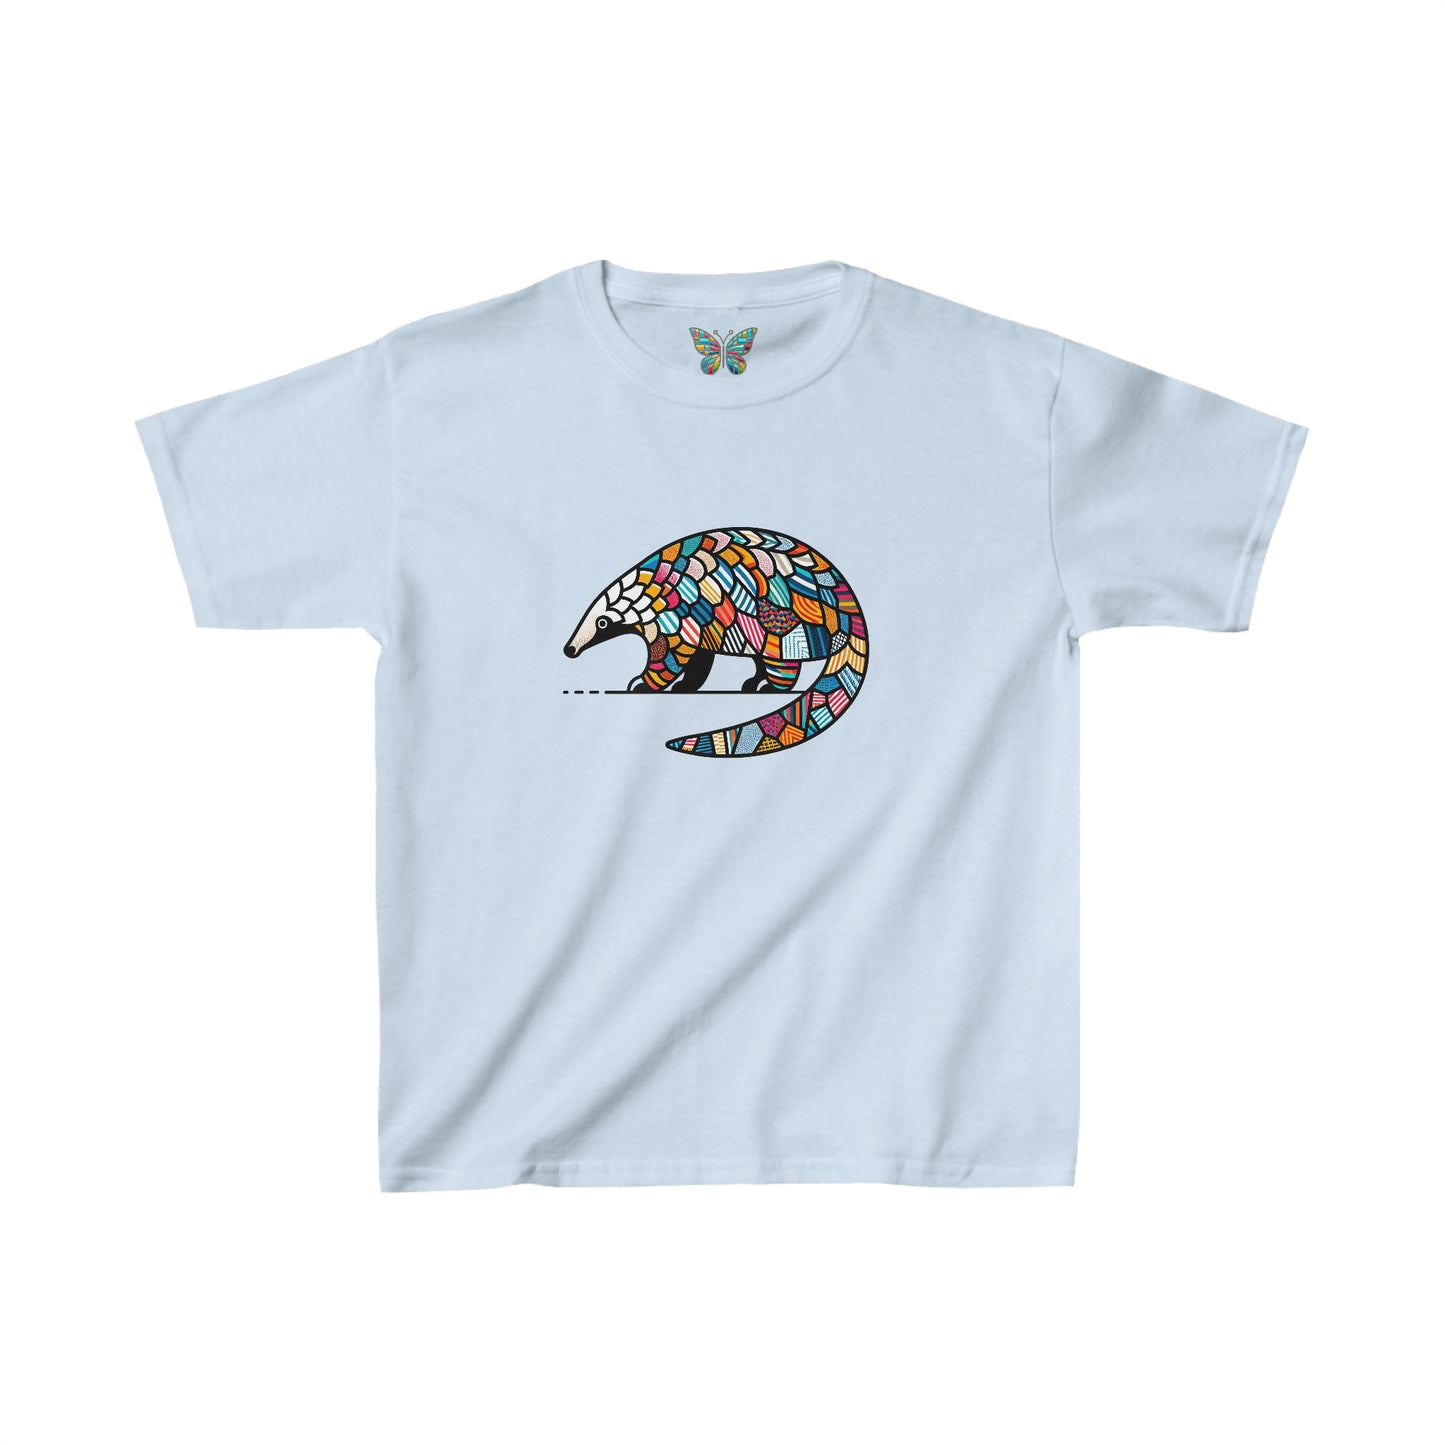 Pangolin Fantascale - Youth - Snazzle Tee